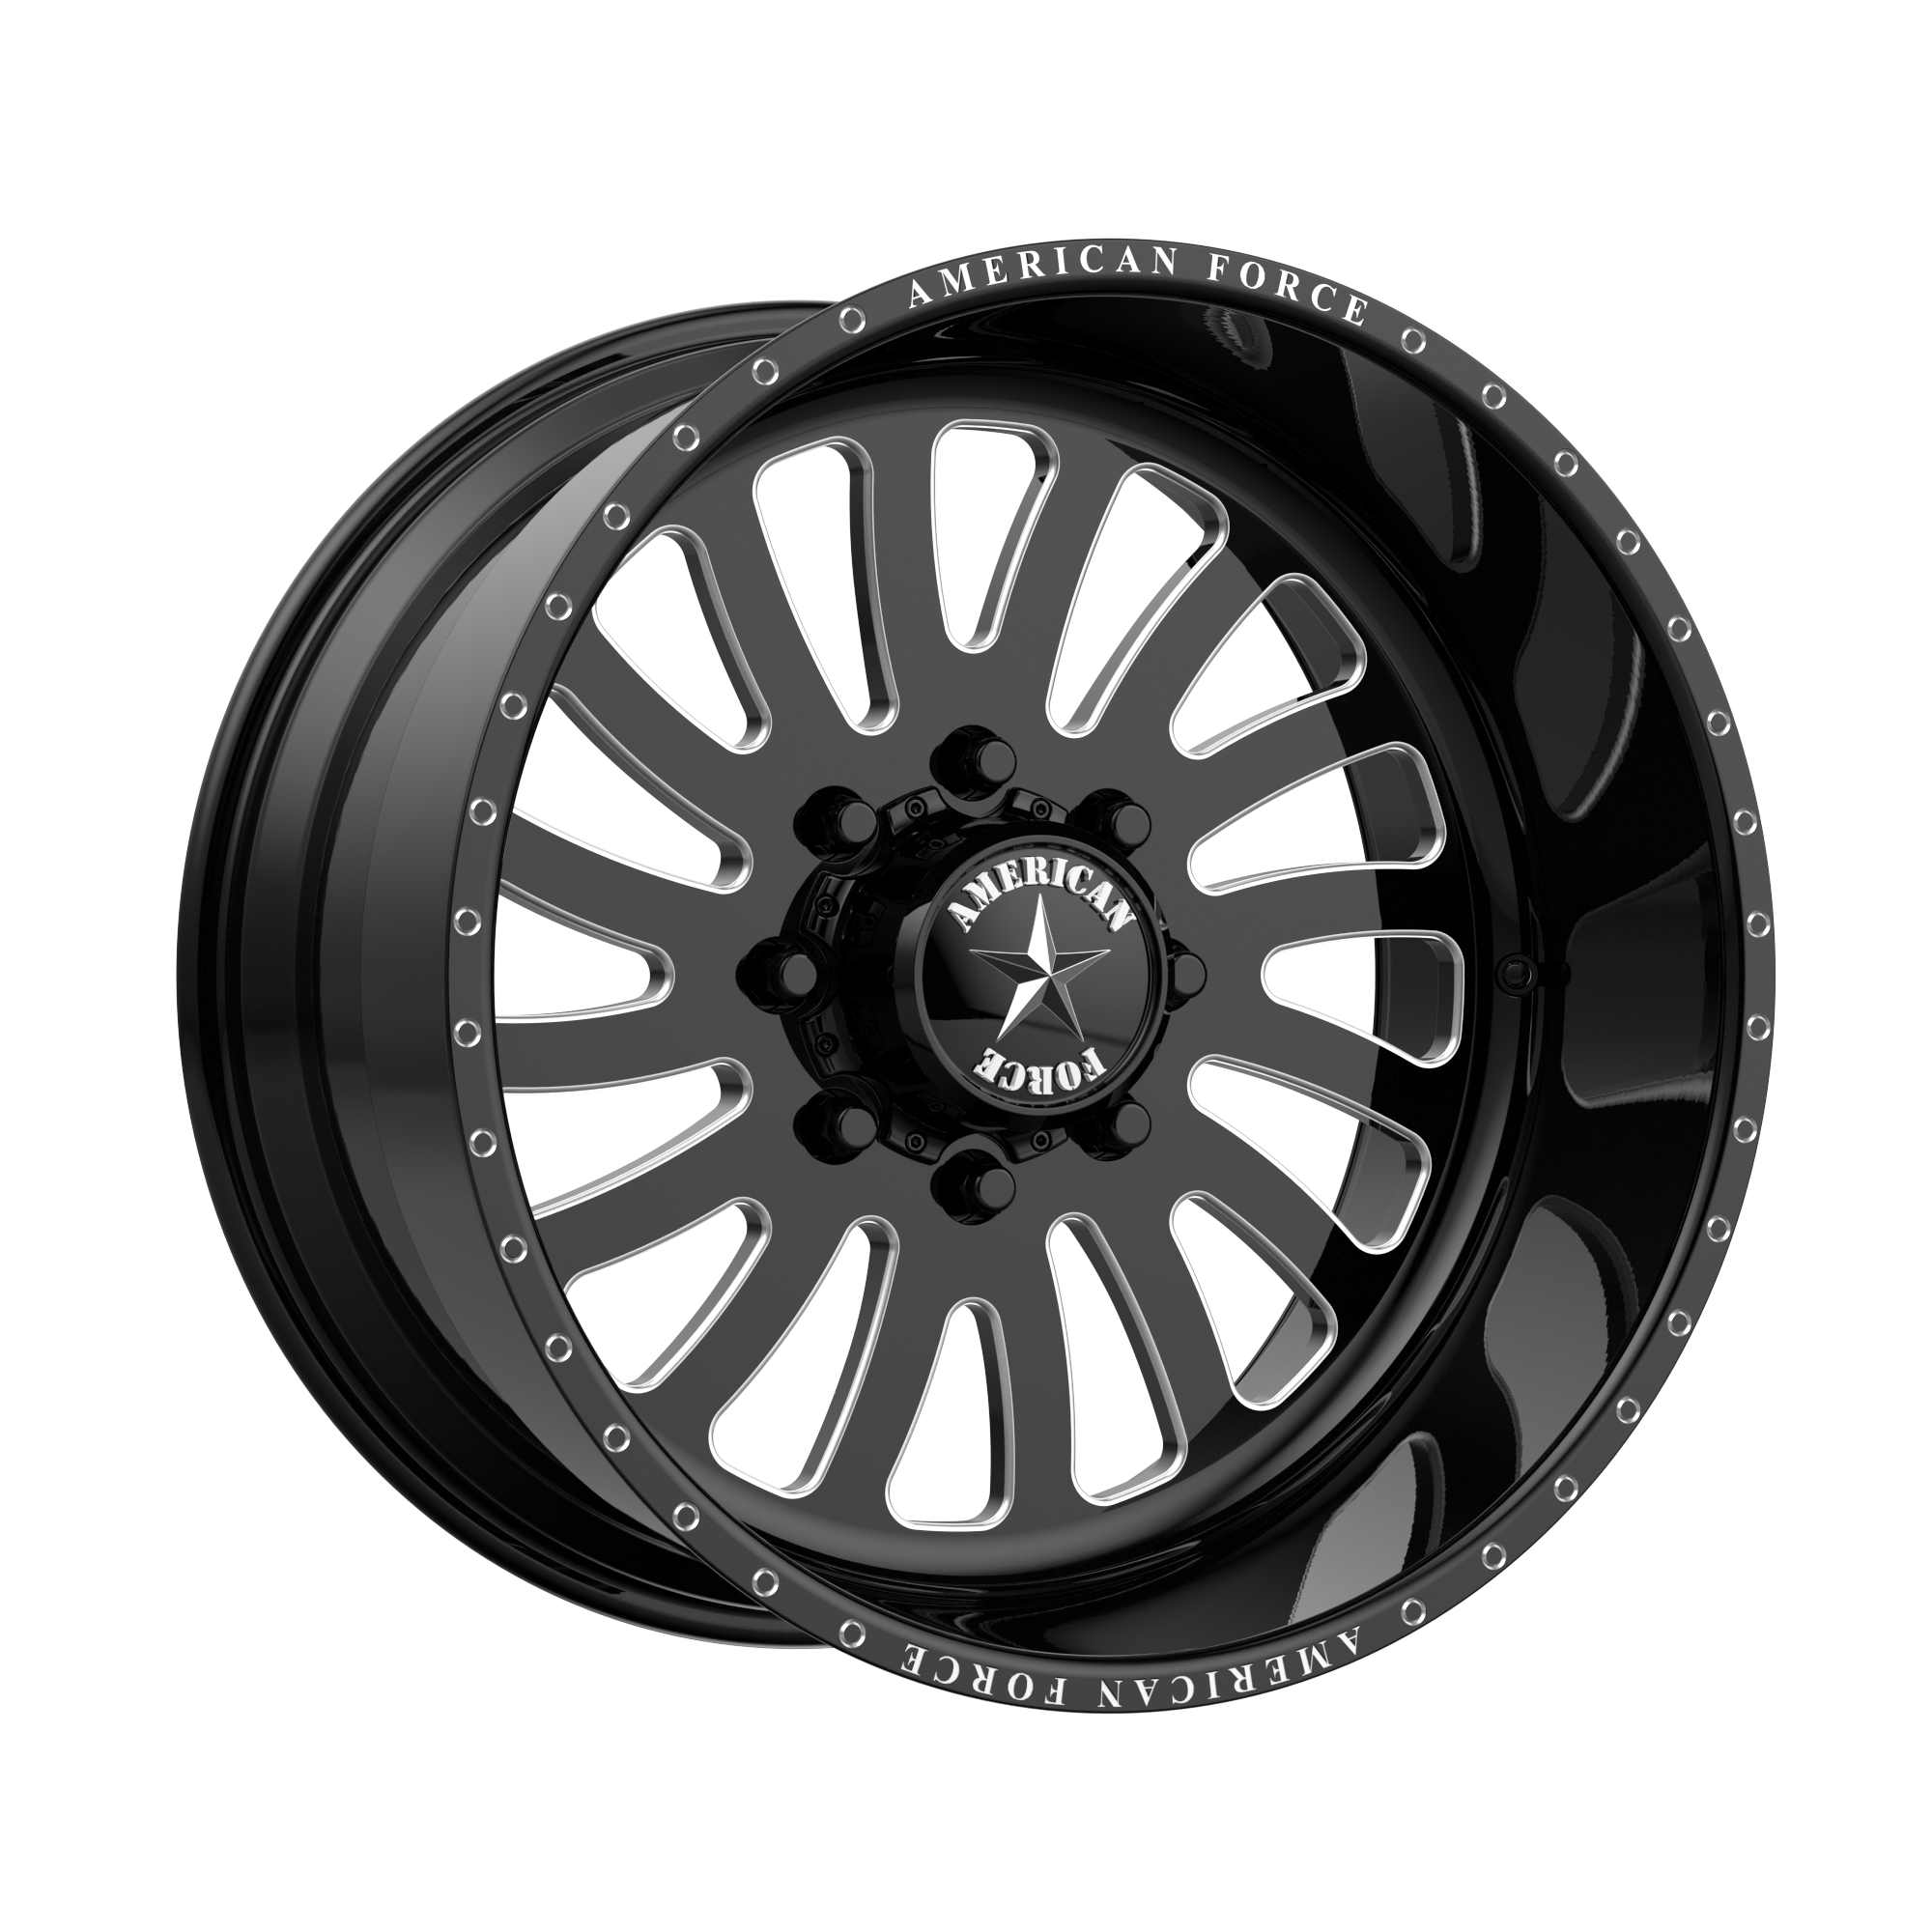 OCTANE SS 22x14 6x139.70 GLOSS BLACK MACHINED (-73 mm) - Tires and Engine Performance